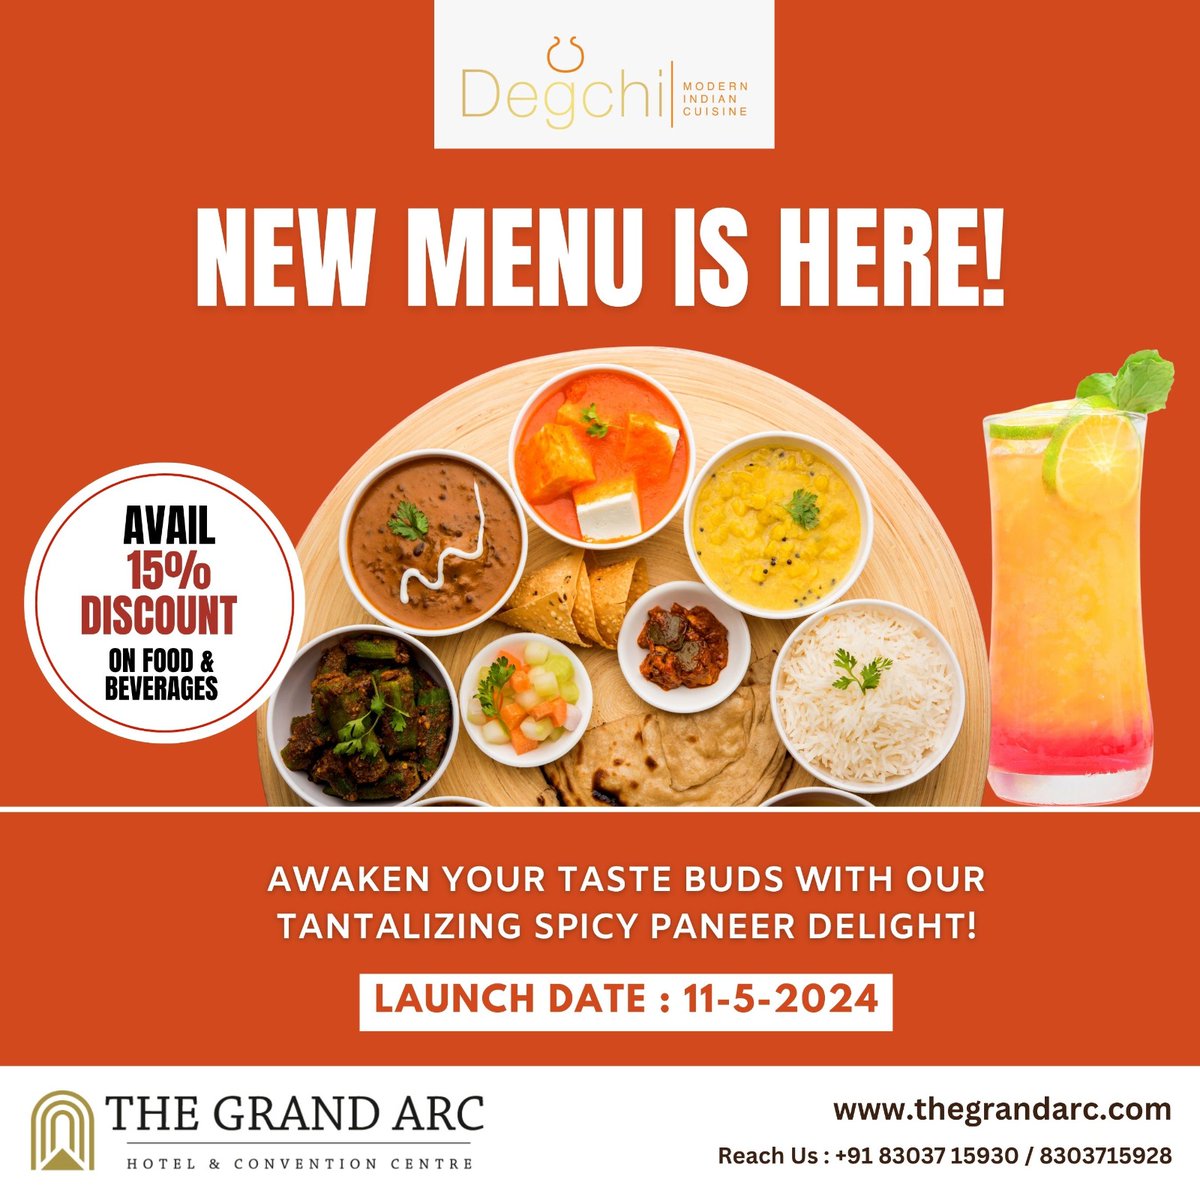 Get Ready to Awaken Your Taste Buds: Our New Menu Launches May 11th!
. 
For Reservation, Please Call:
+91 8303715930 / 8303715928
. 
. 
#TheGrandArc #shahjahanpur #GratefulGuests  #HappyHearts #SipAndSavor #ExploreResponsibly #happymemories #NewMenuAlert #AwakenYourTasteBuds